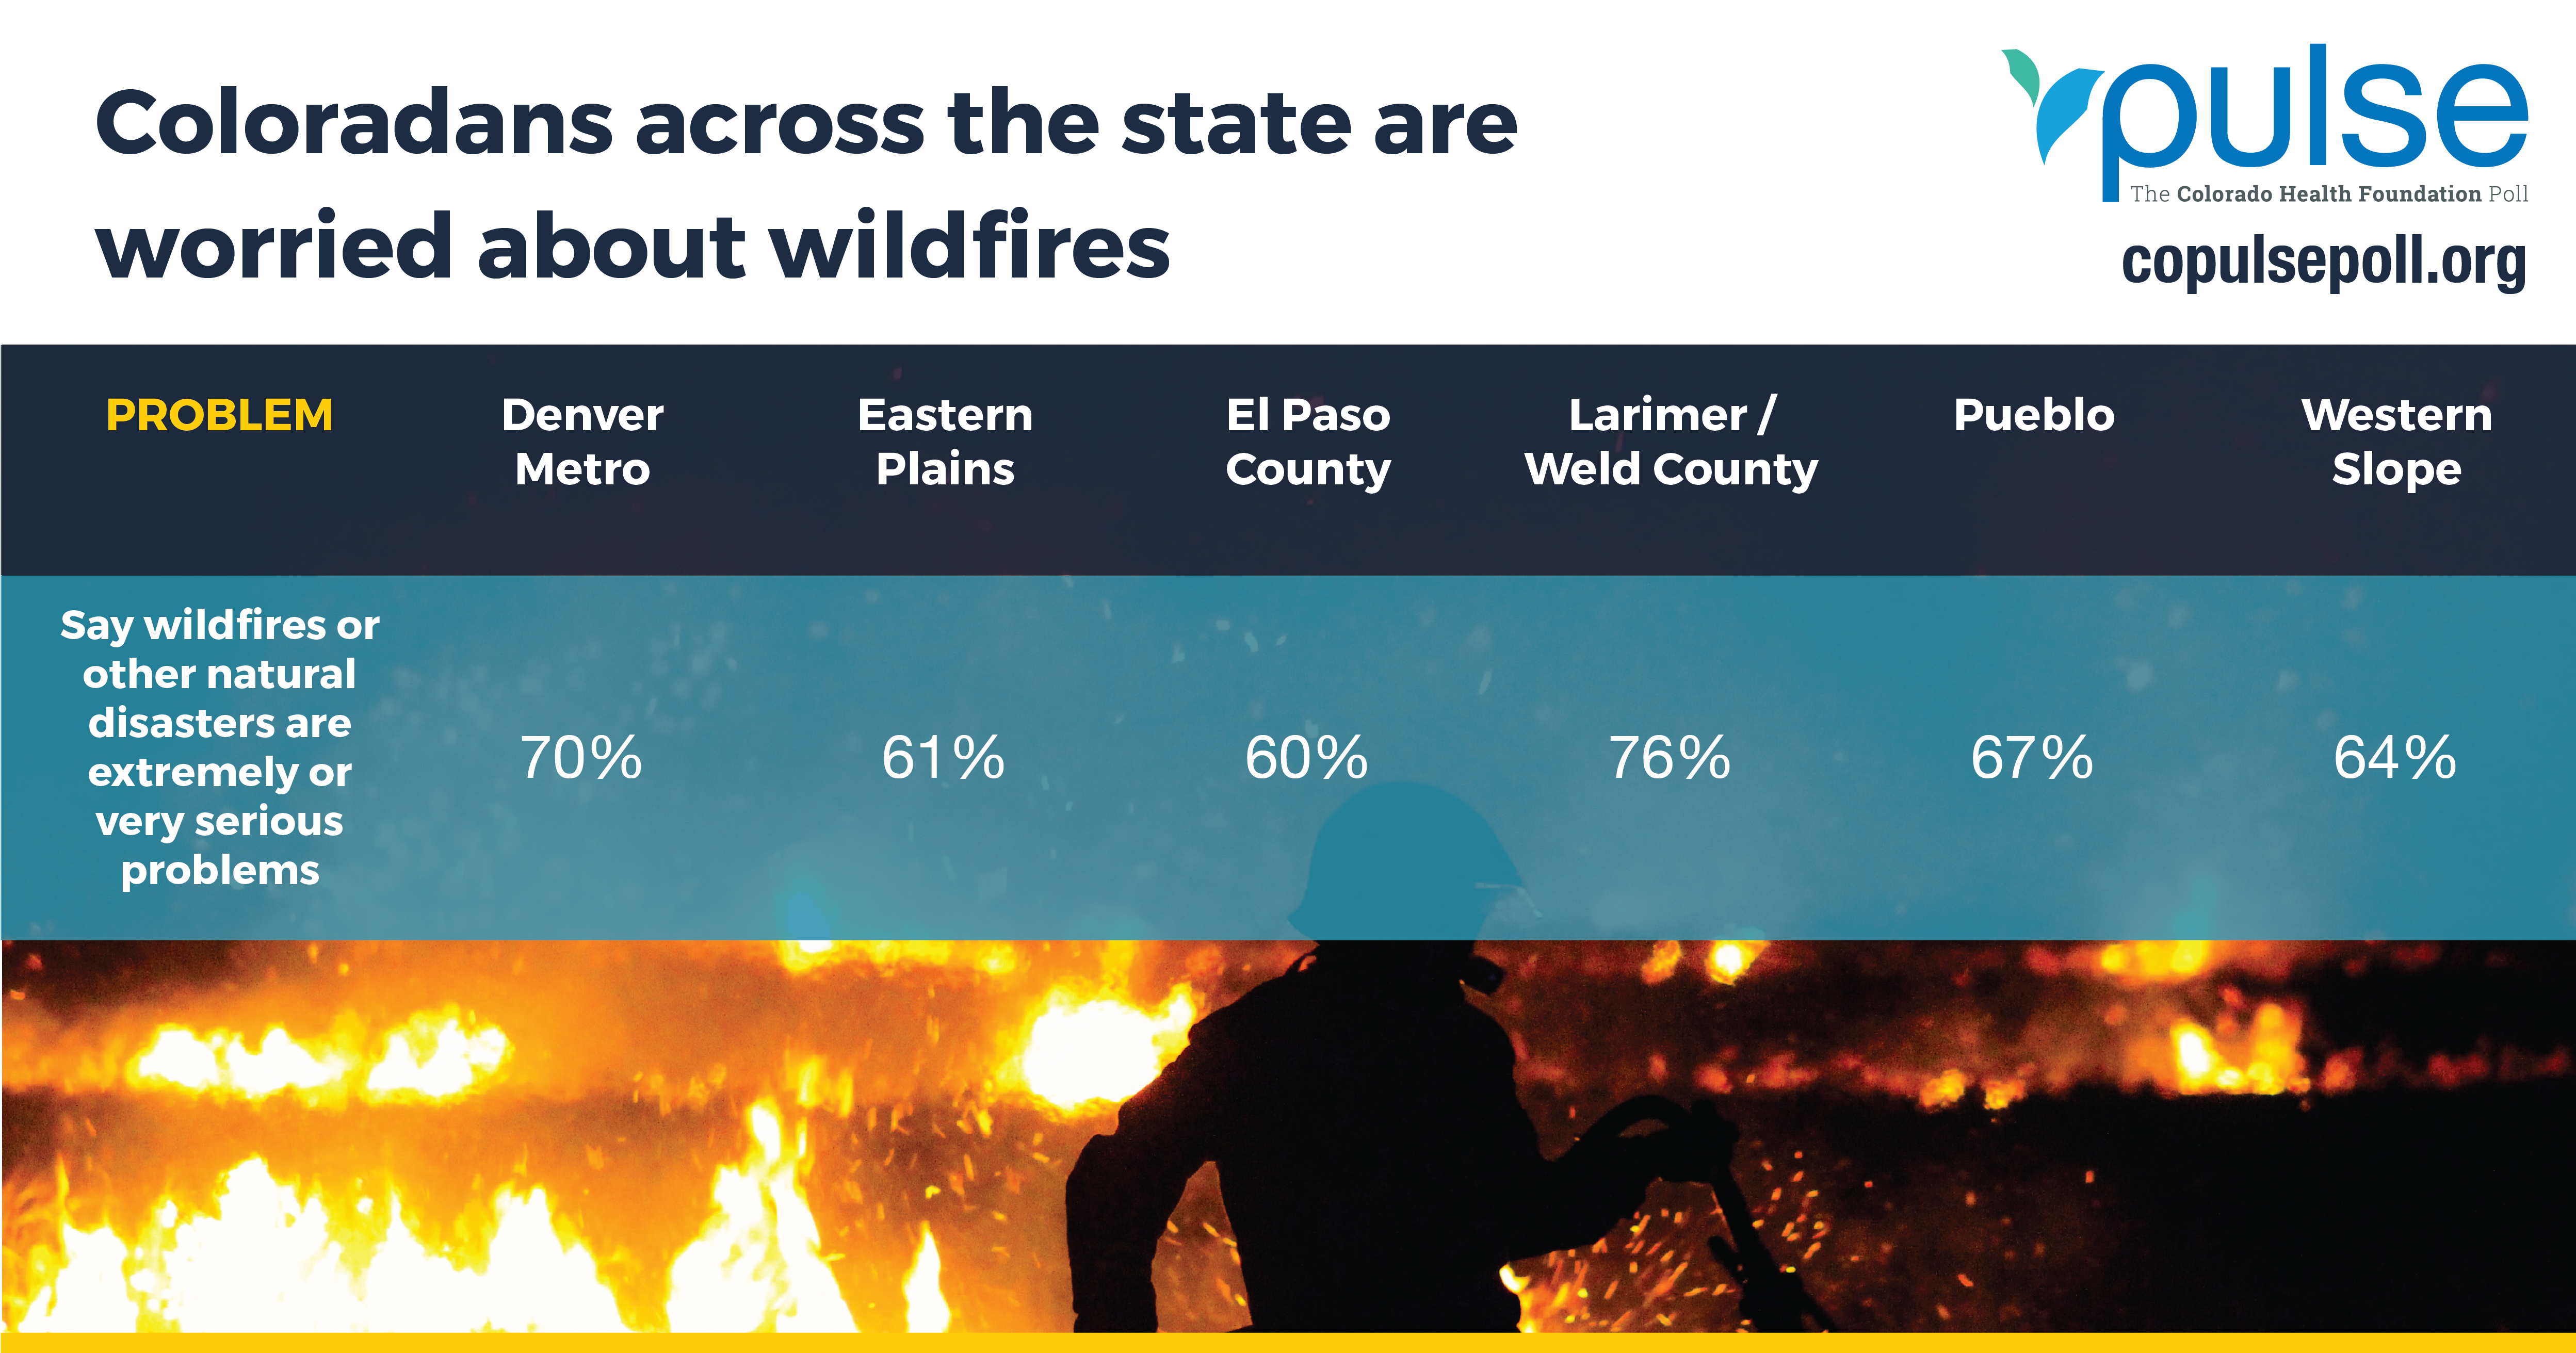 GRAPHIC: Coloradans across the state are worried about wildfires. 